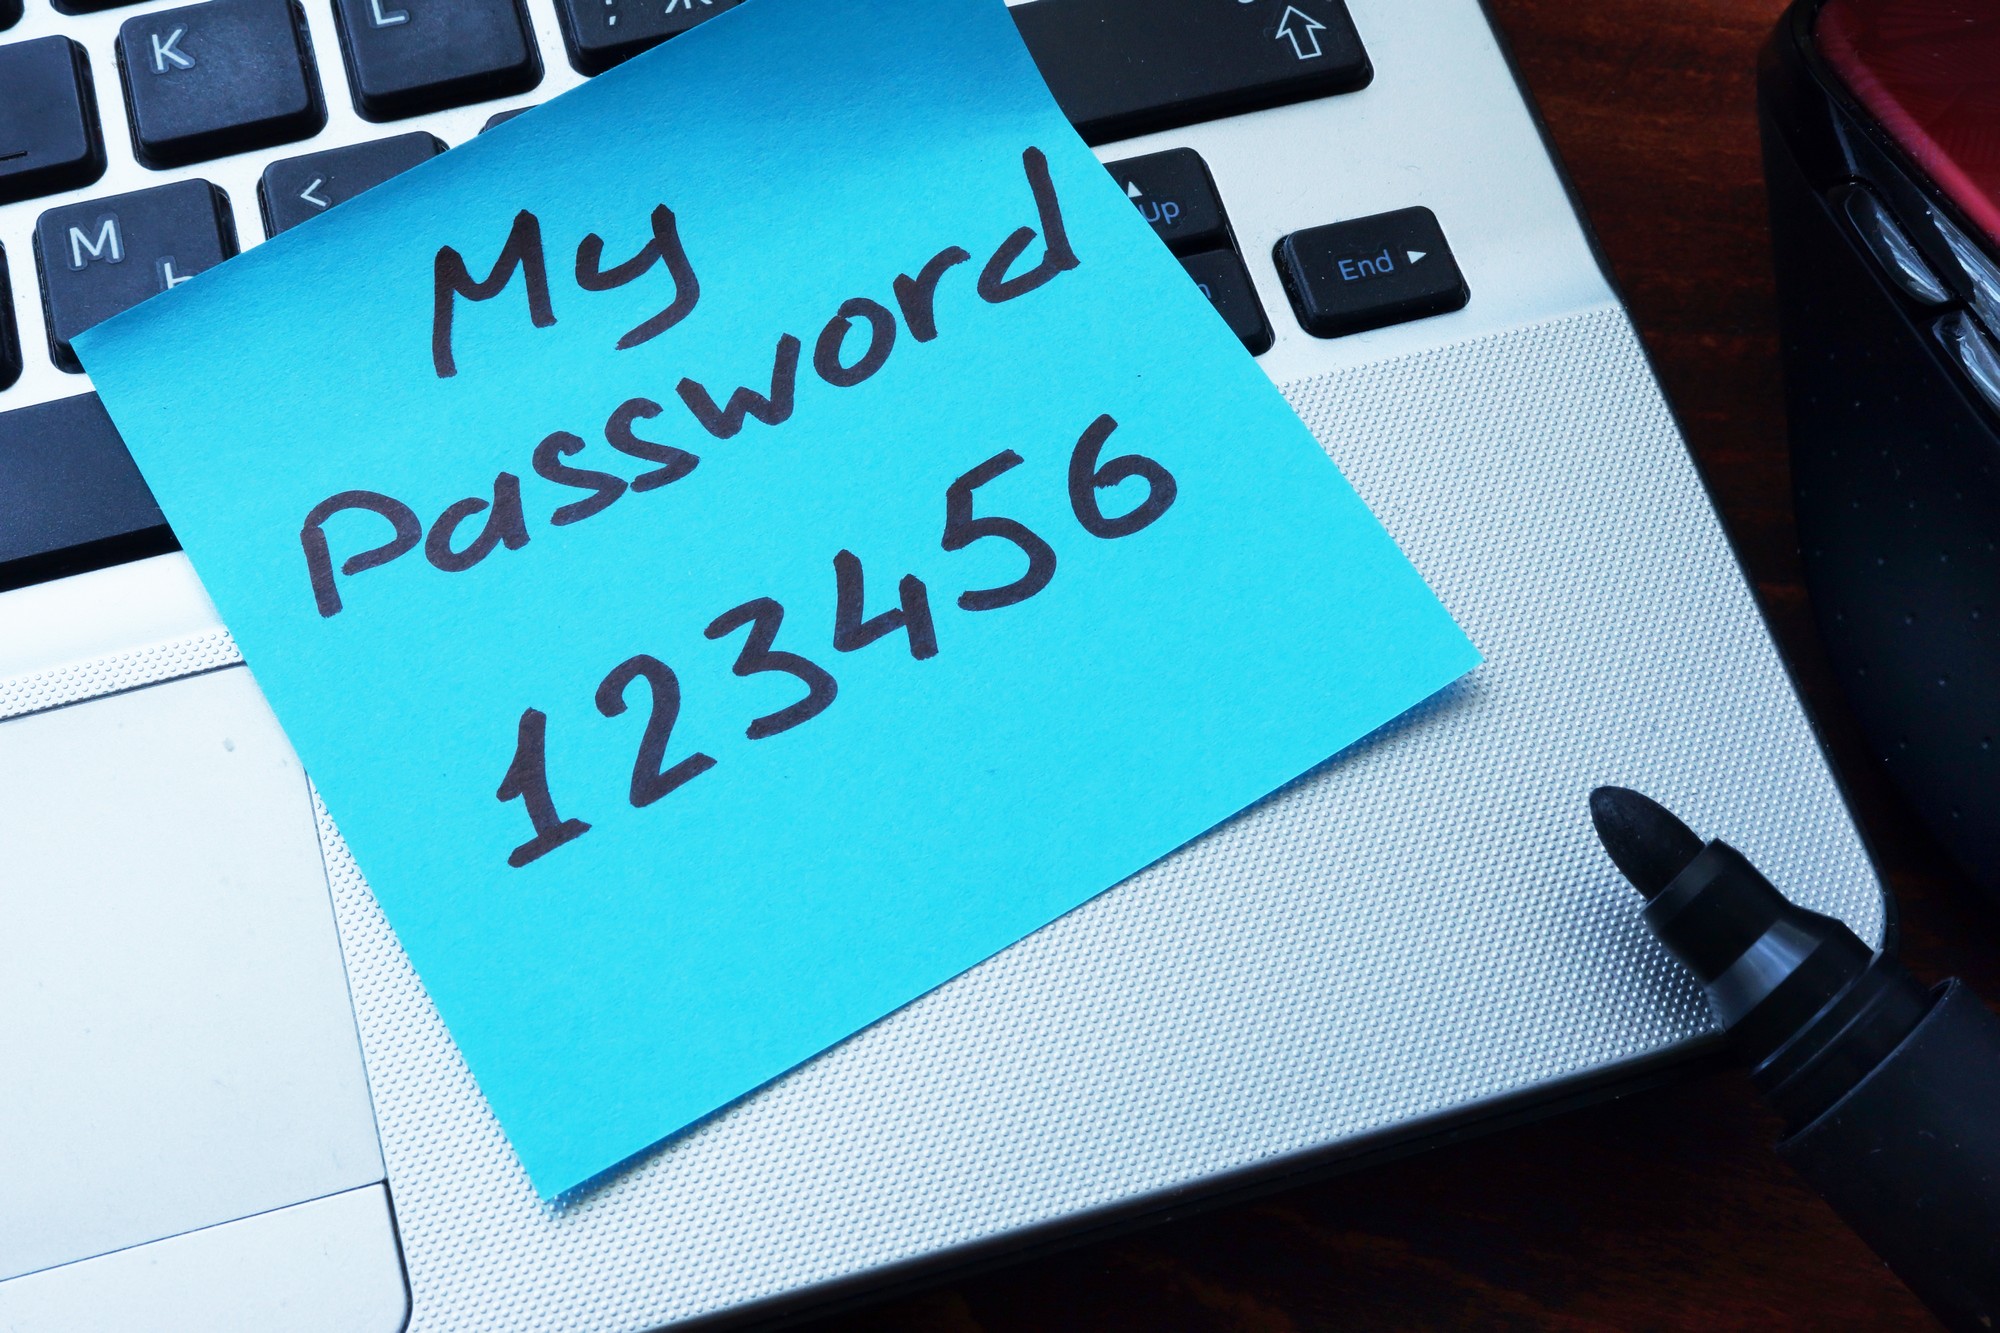 It can take a hacker up to 26 billion years to crack a strong 16-digit password, change yours ASAP!